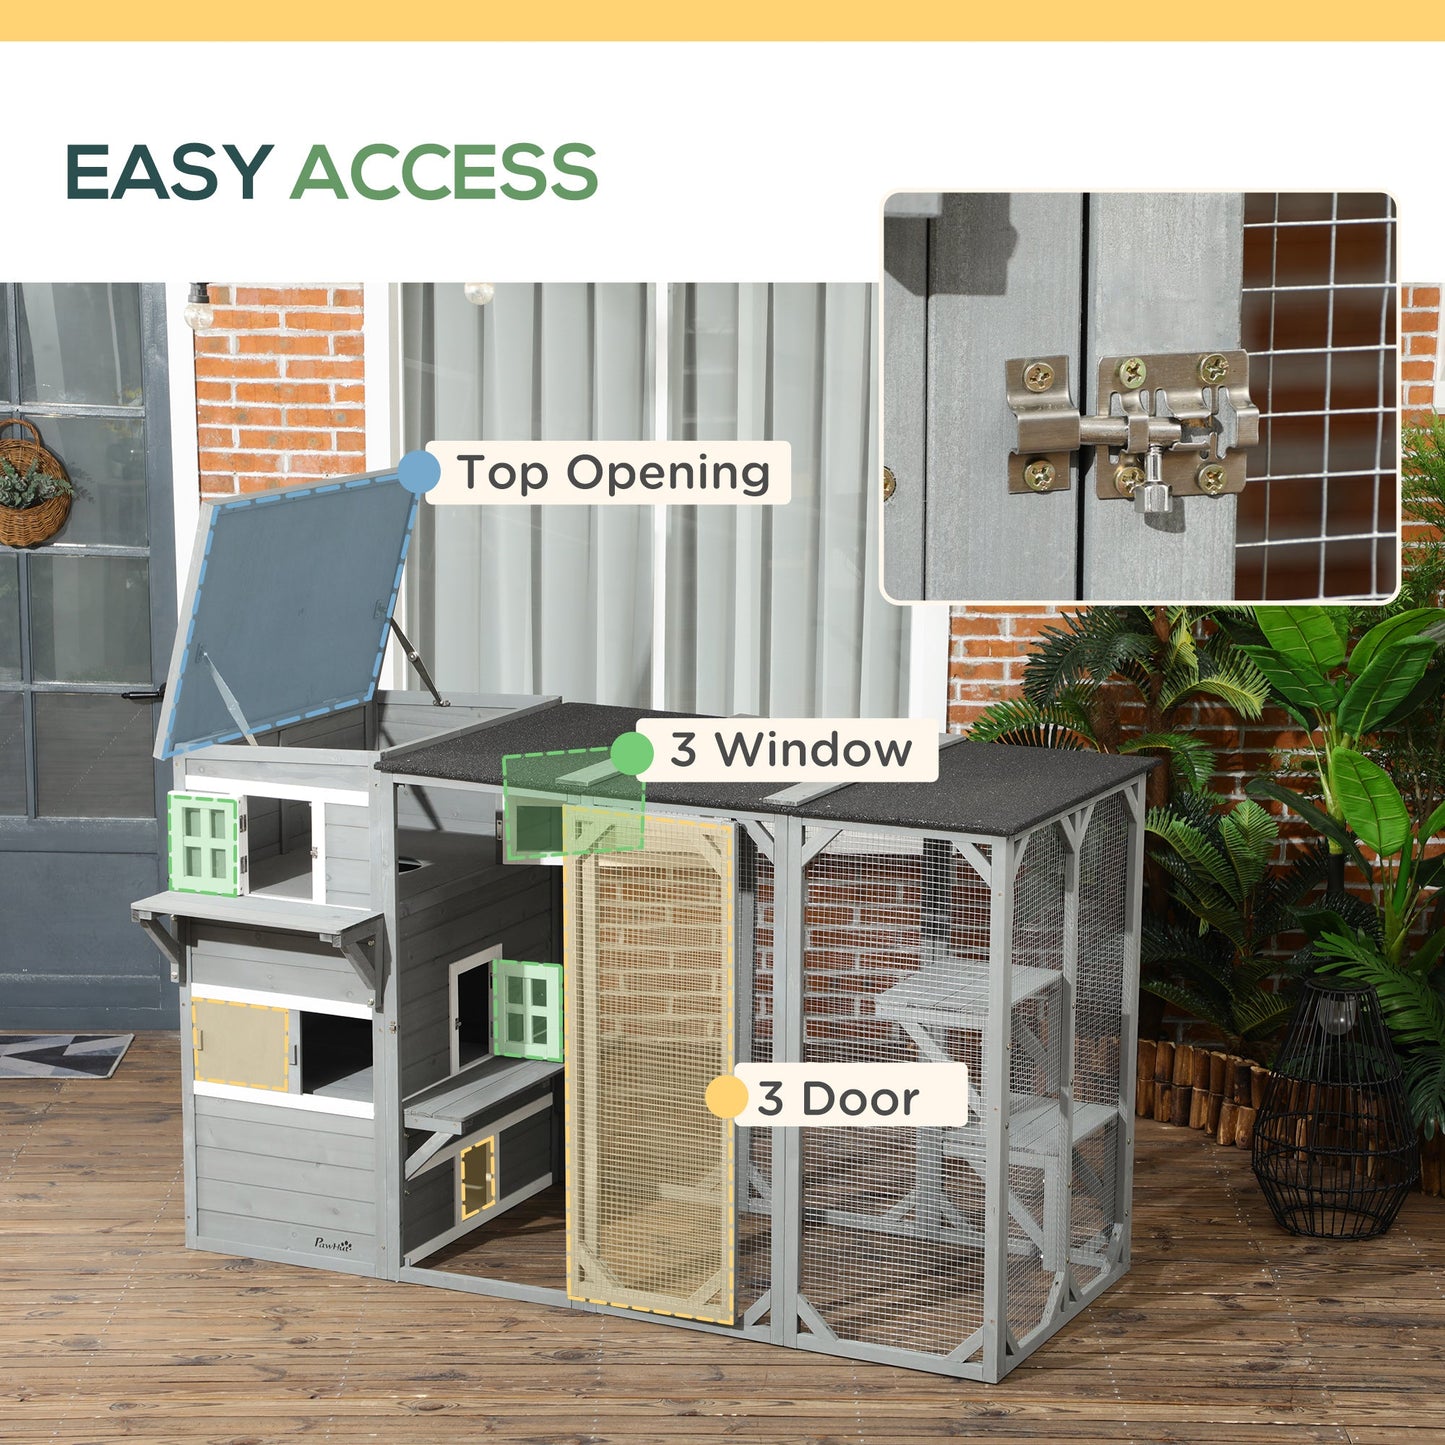 Wooden Cat Catio, 76"L Walk in Outdoor Cat House with Asphalt Roof, Platforms, Lockable Doors, 3-tier Resting Condo, Observation Window, for 2-3 Cats at Gallery Canada